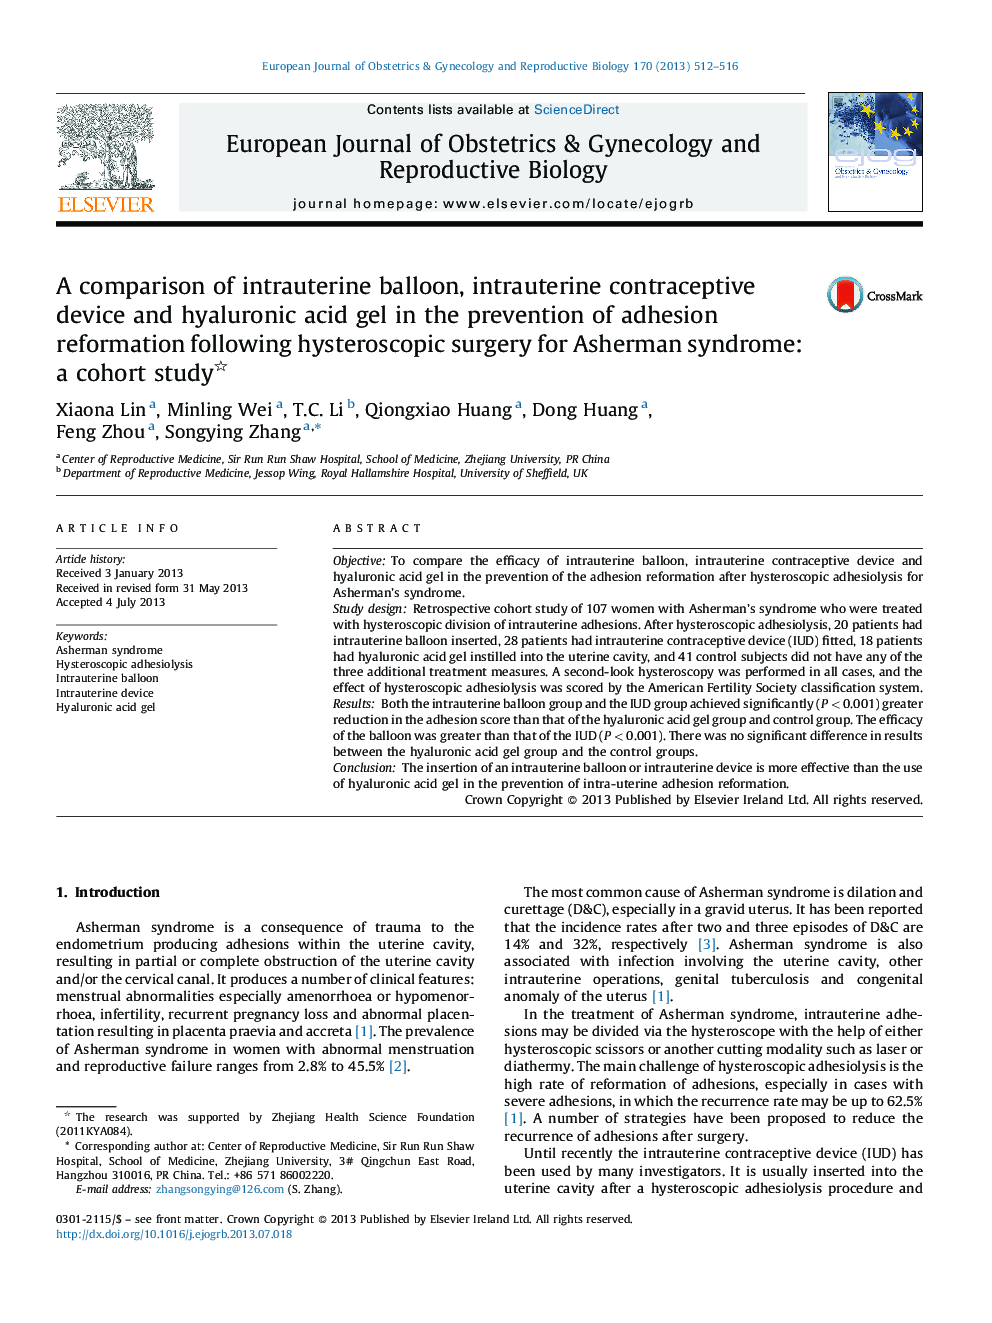 A comparison of intrauterine balloon, intrauterine contraceptive device and hyaluronic acid gel in the prevention of adhesion reformation following hysteroscopic surgery for Asherman syndrome: a cohort study